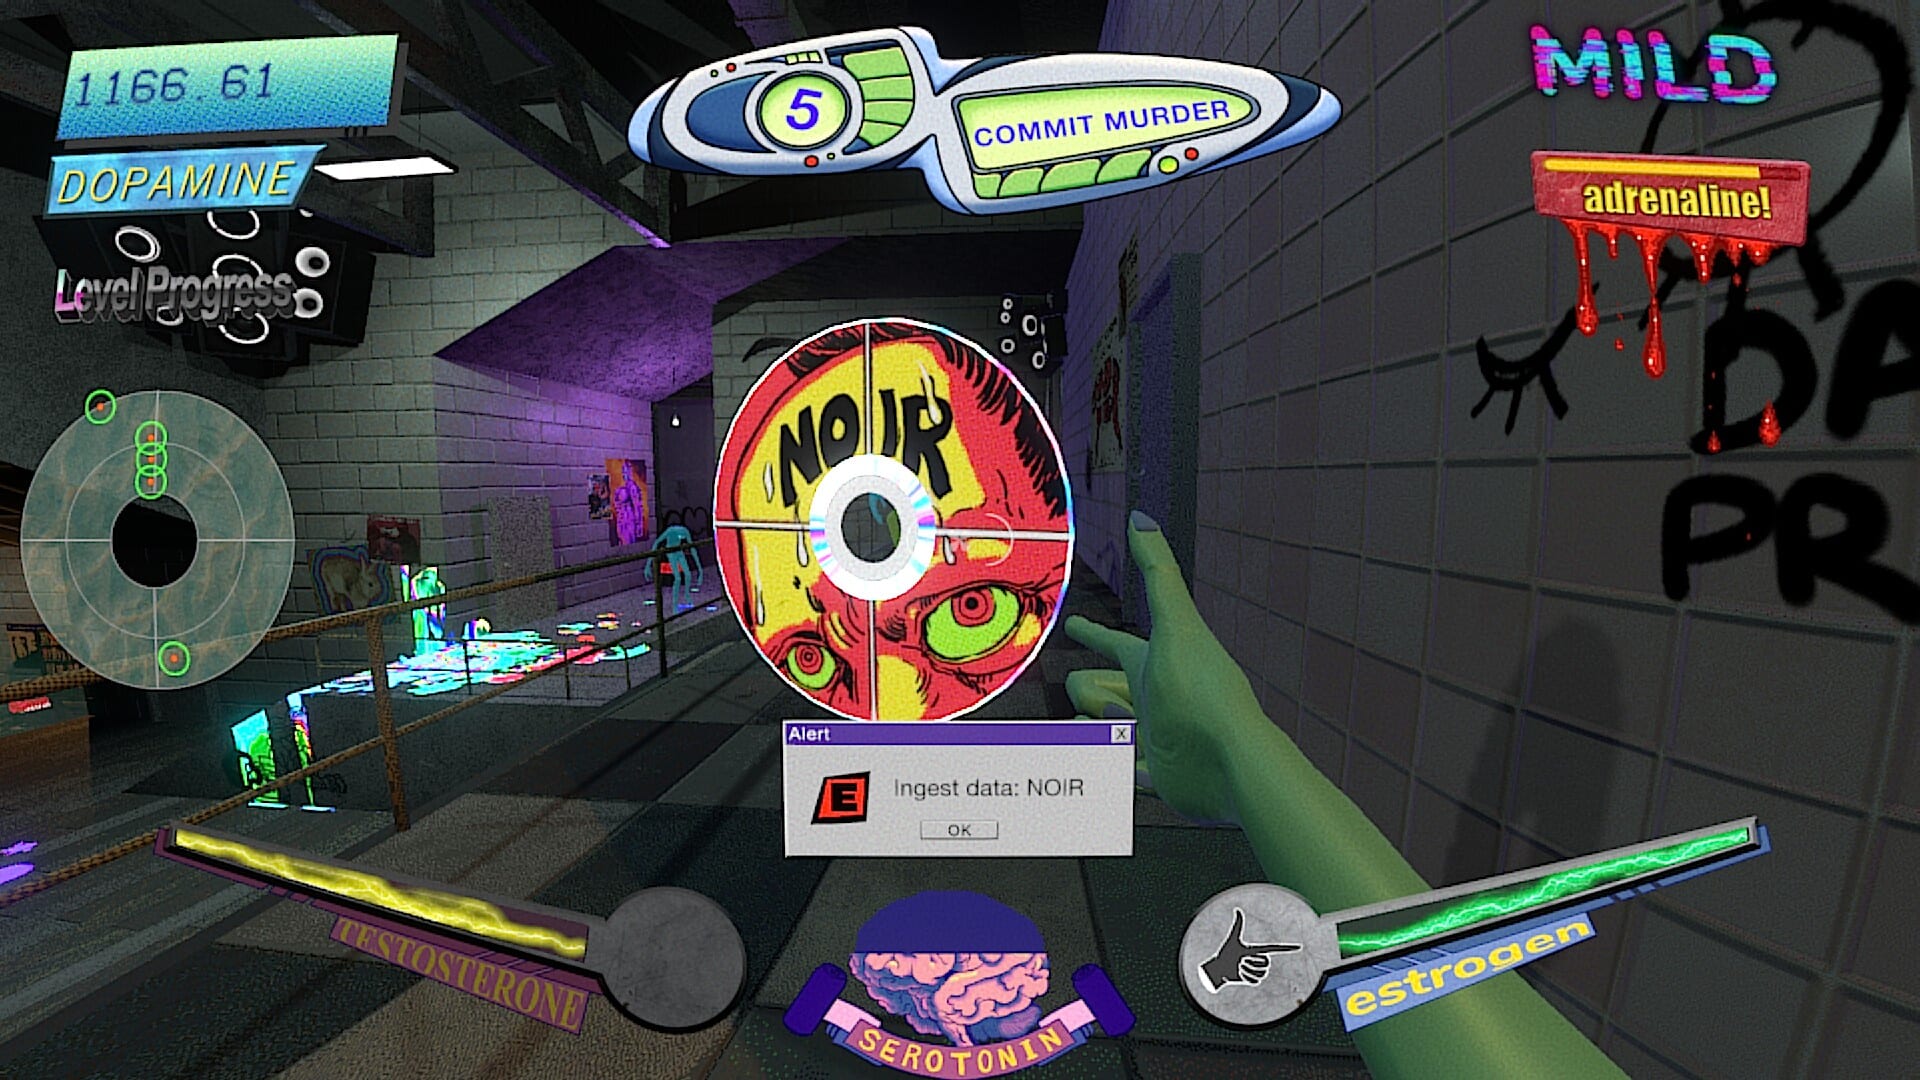 In Splatter you collect compact discs to upgrade your guns